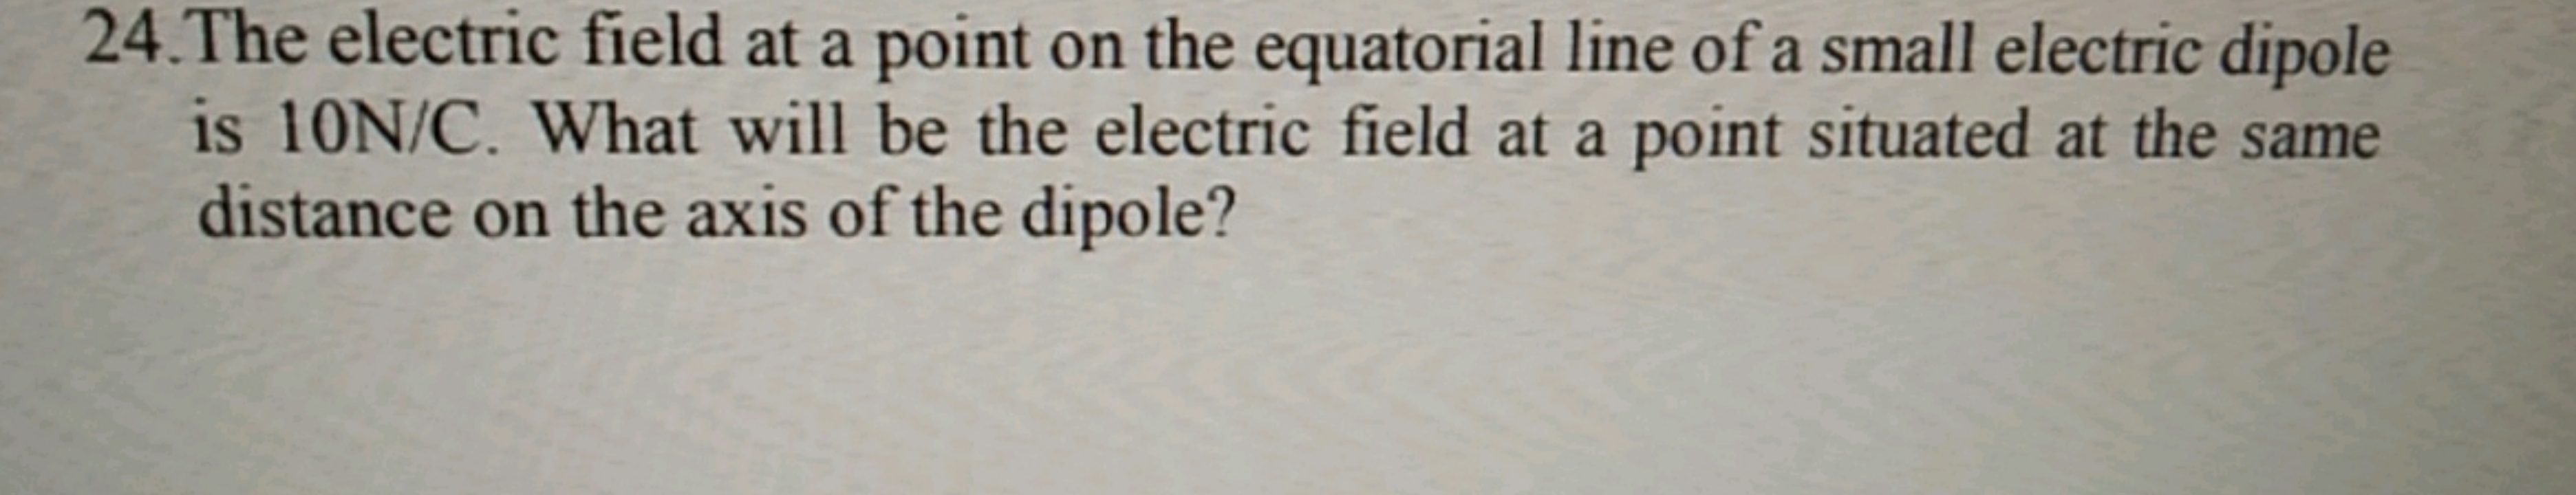 24. The electric field at a point on the equatorial line of a small el